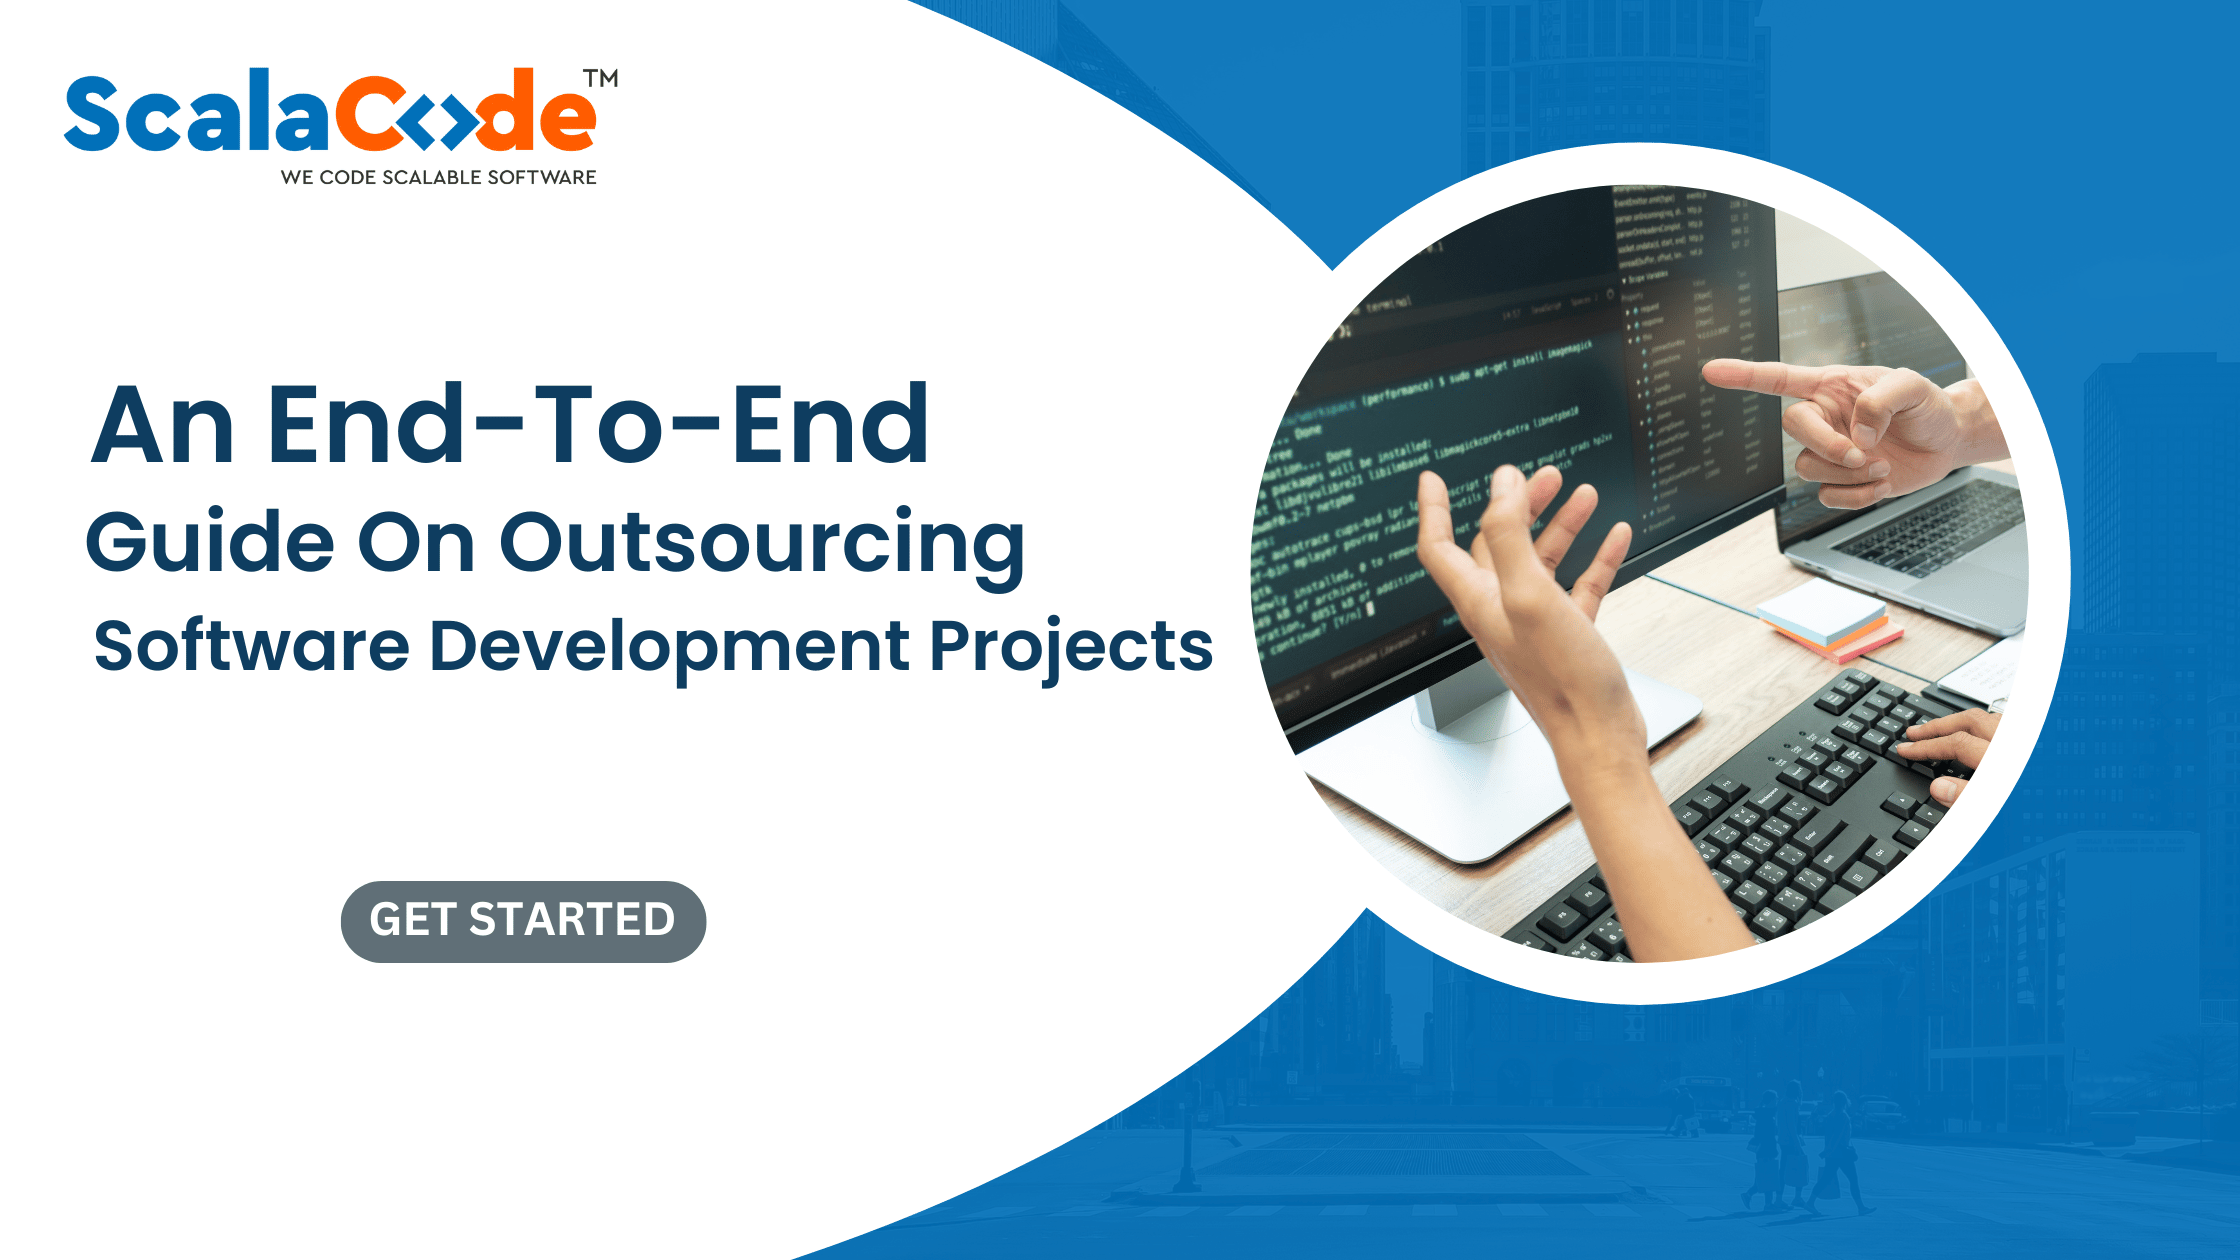 An End-To-End Guide On Outsourcing Software Development Projects